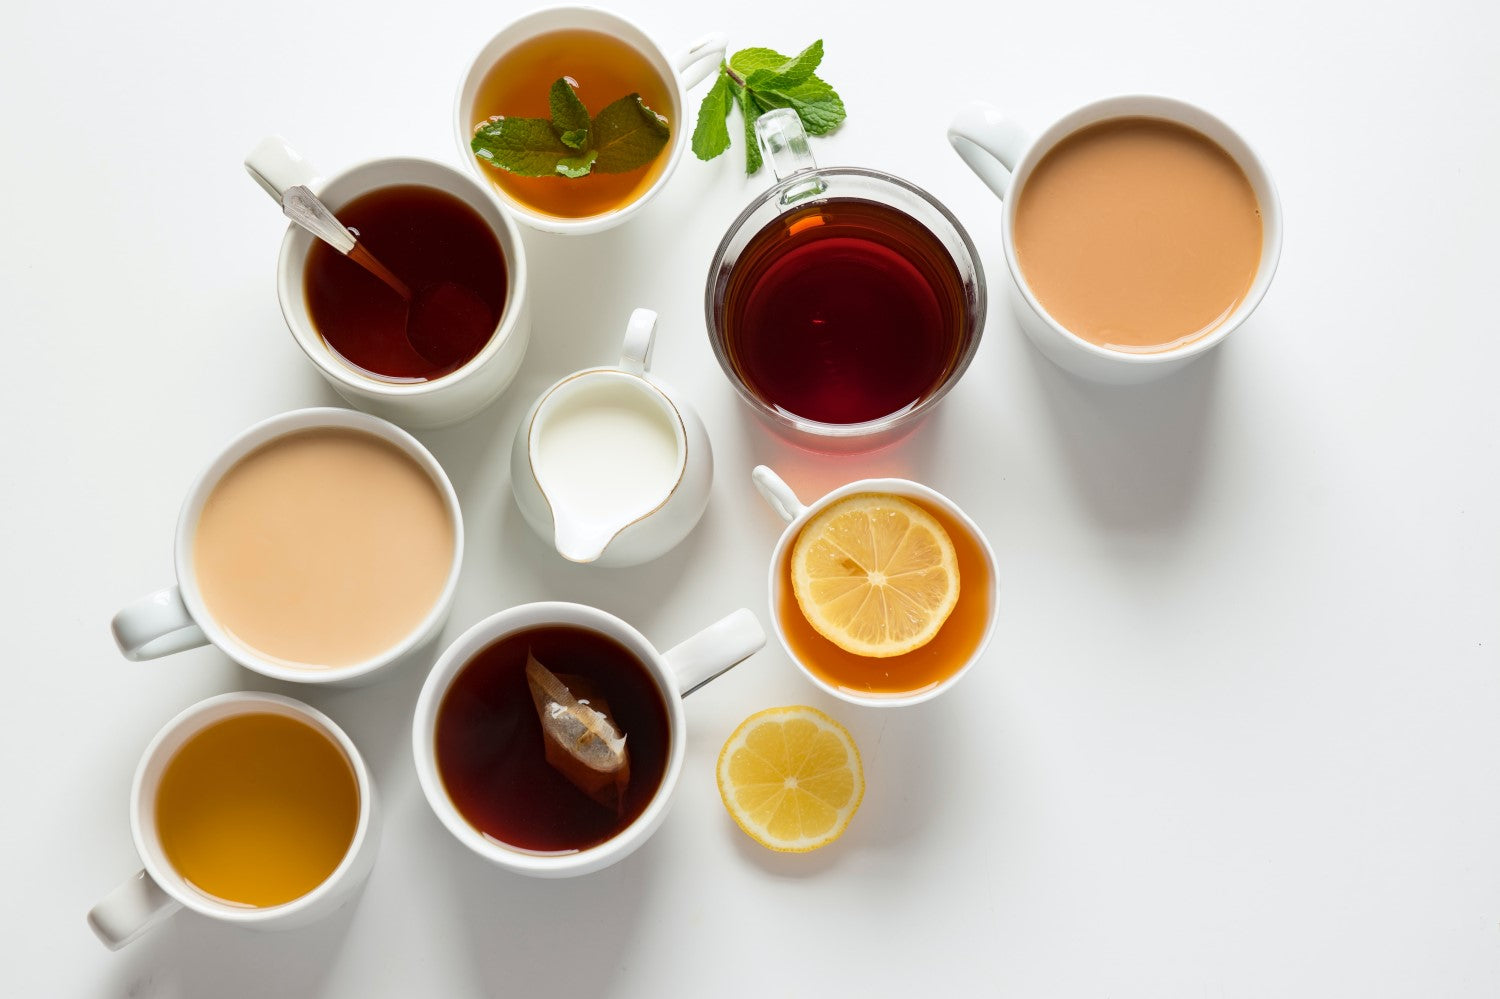 Are There Any Calories in Tea?